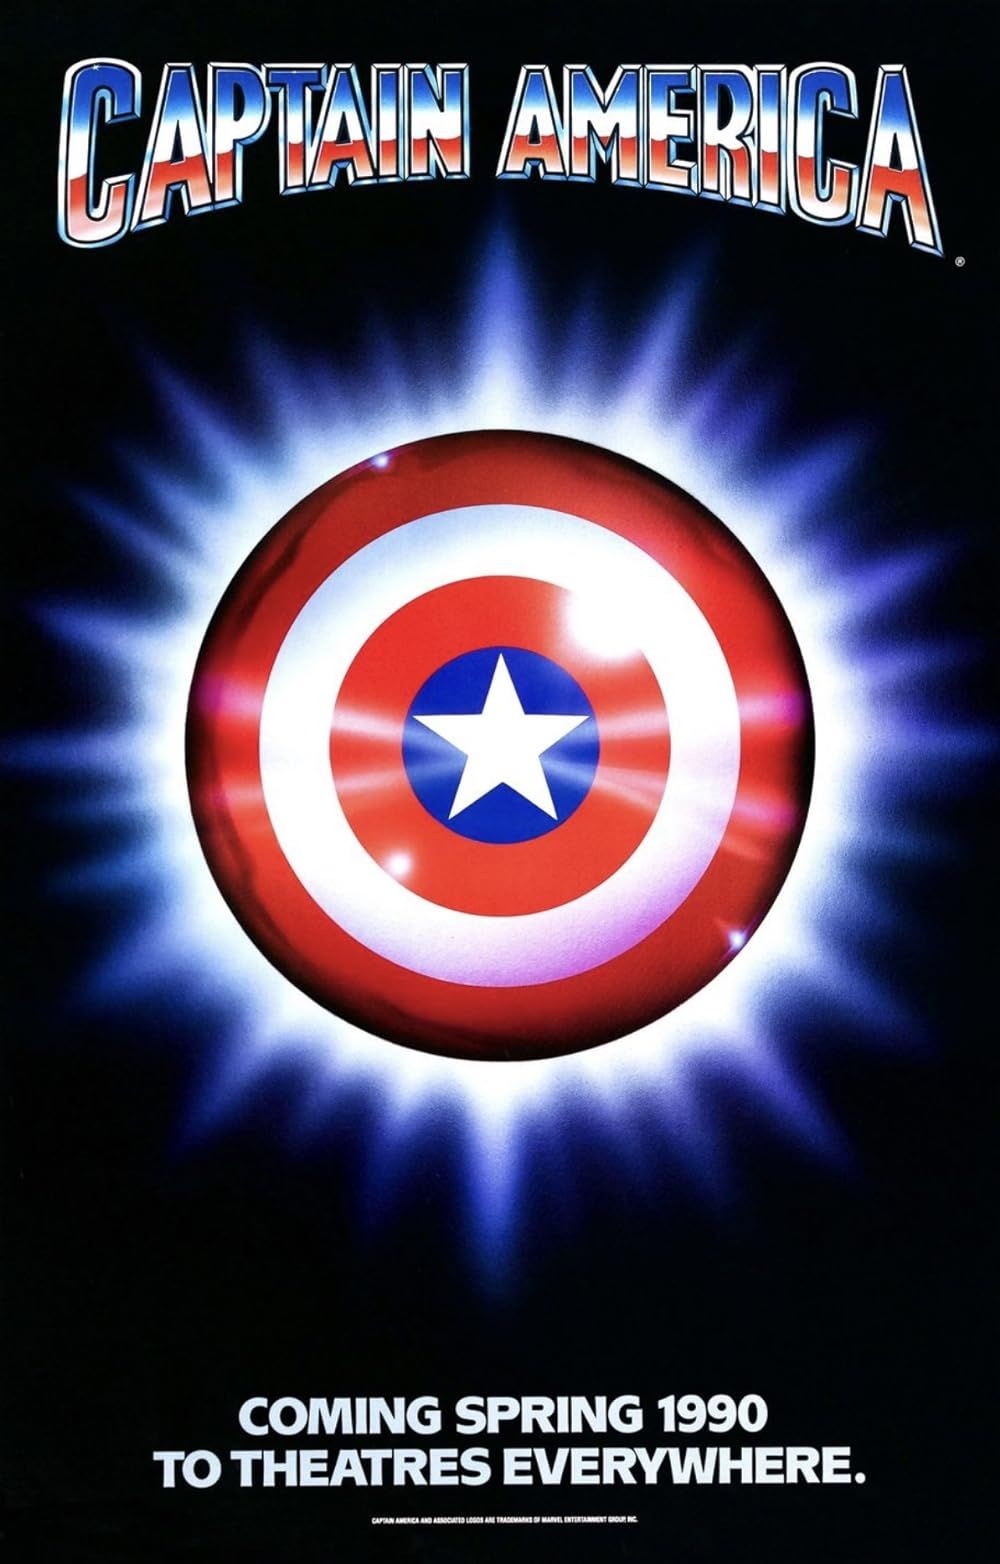 Captain America's Shield Is Illuminated from Behind on the Captain America Poster